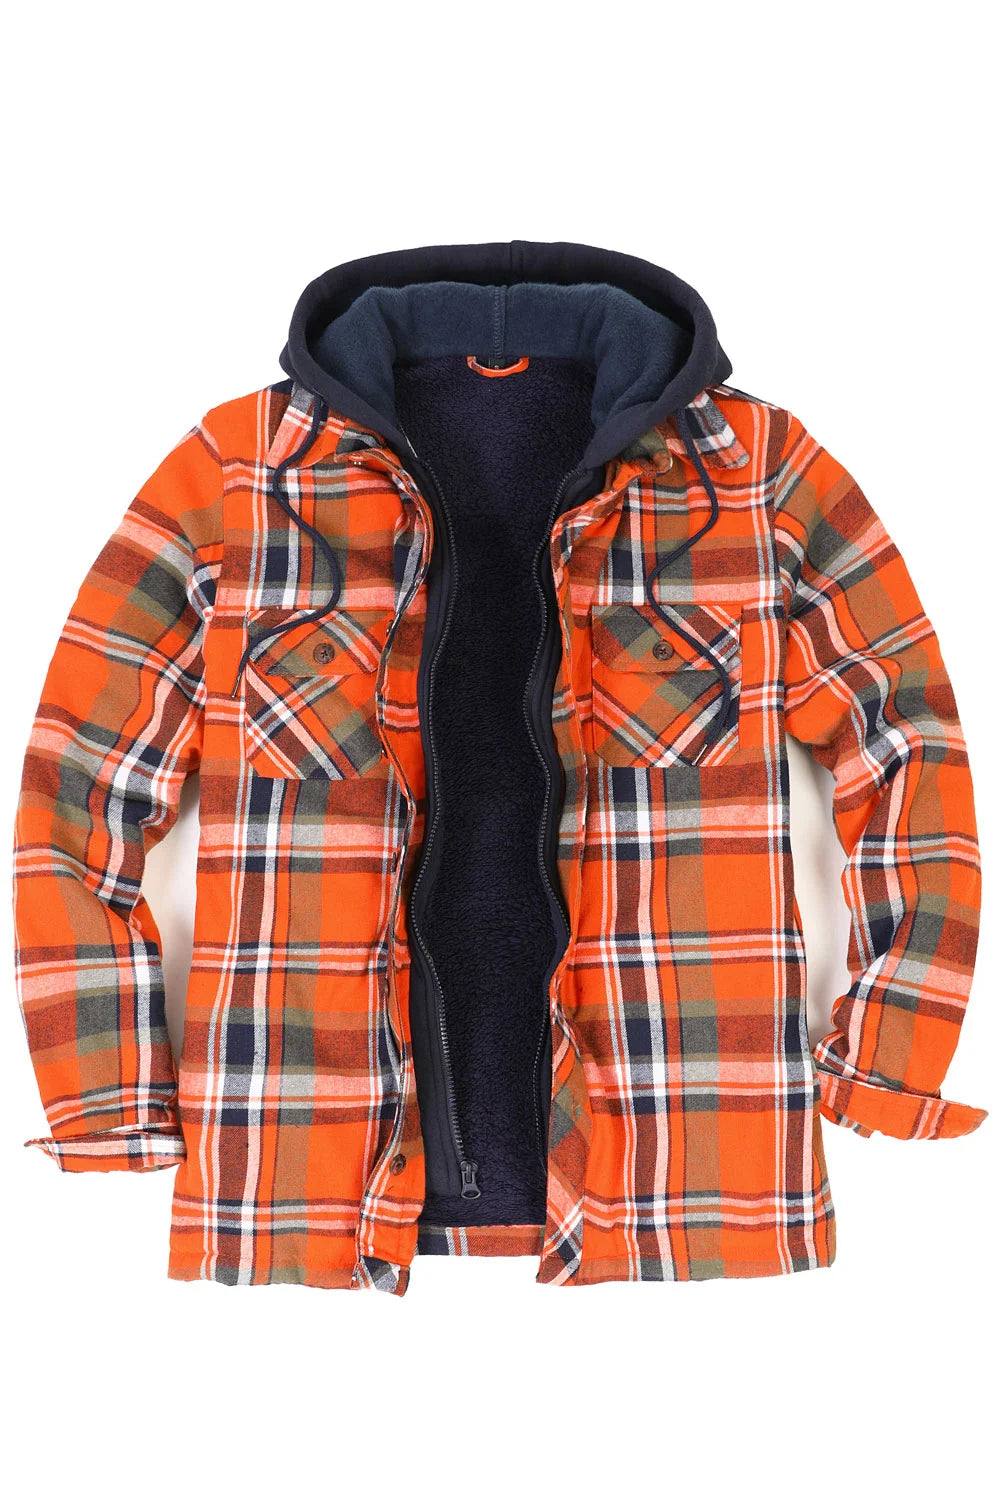 Men's Fuzzy Sherpa Lined Zip Up Plaid Flannel Shirt Jacket with Hood